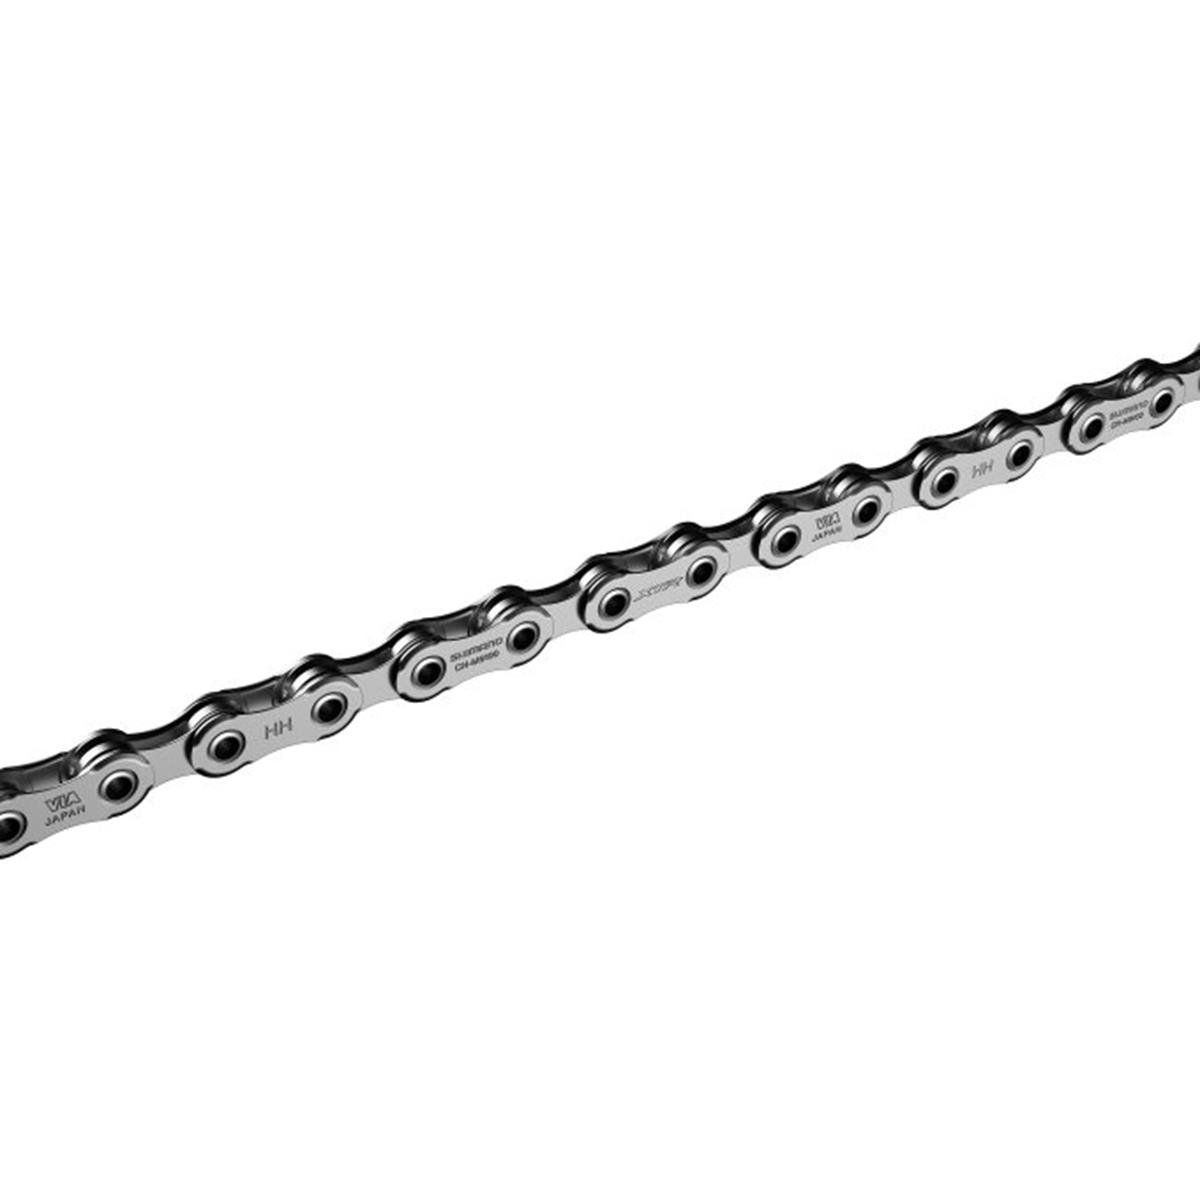 Shimano MTB Chain CN-M9100 116 Links, 12-Speed, with Master Link